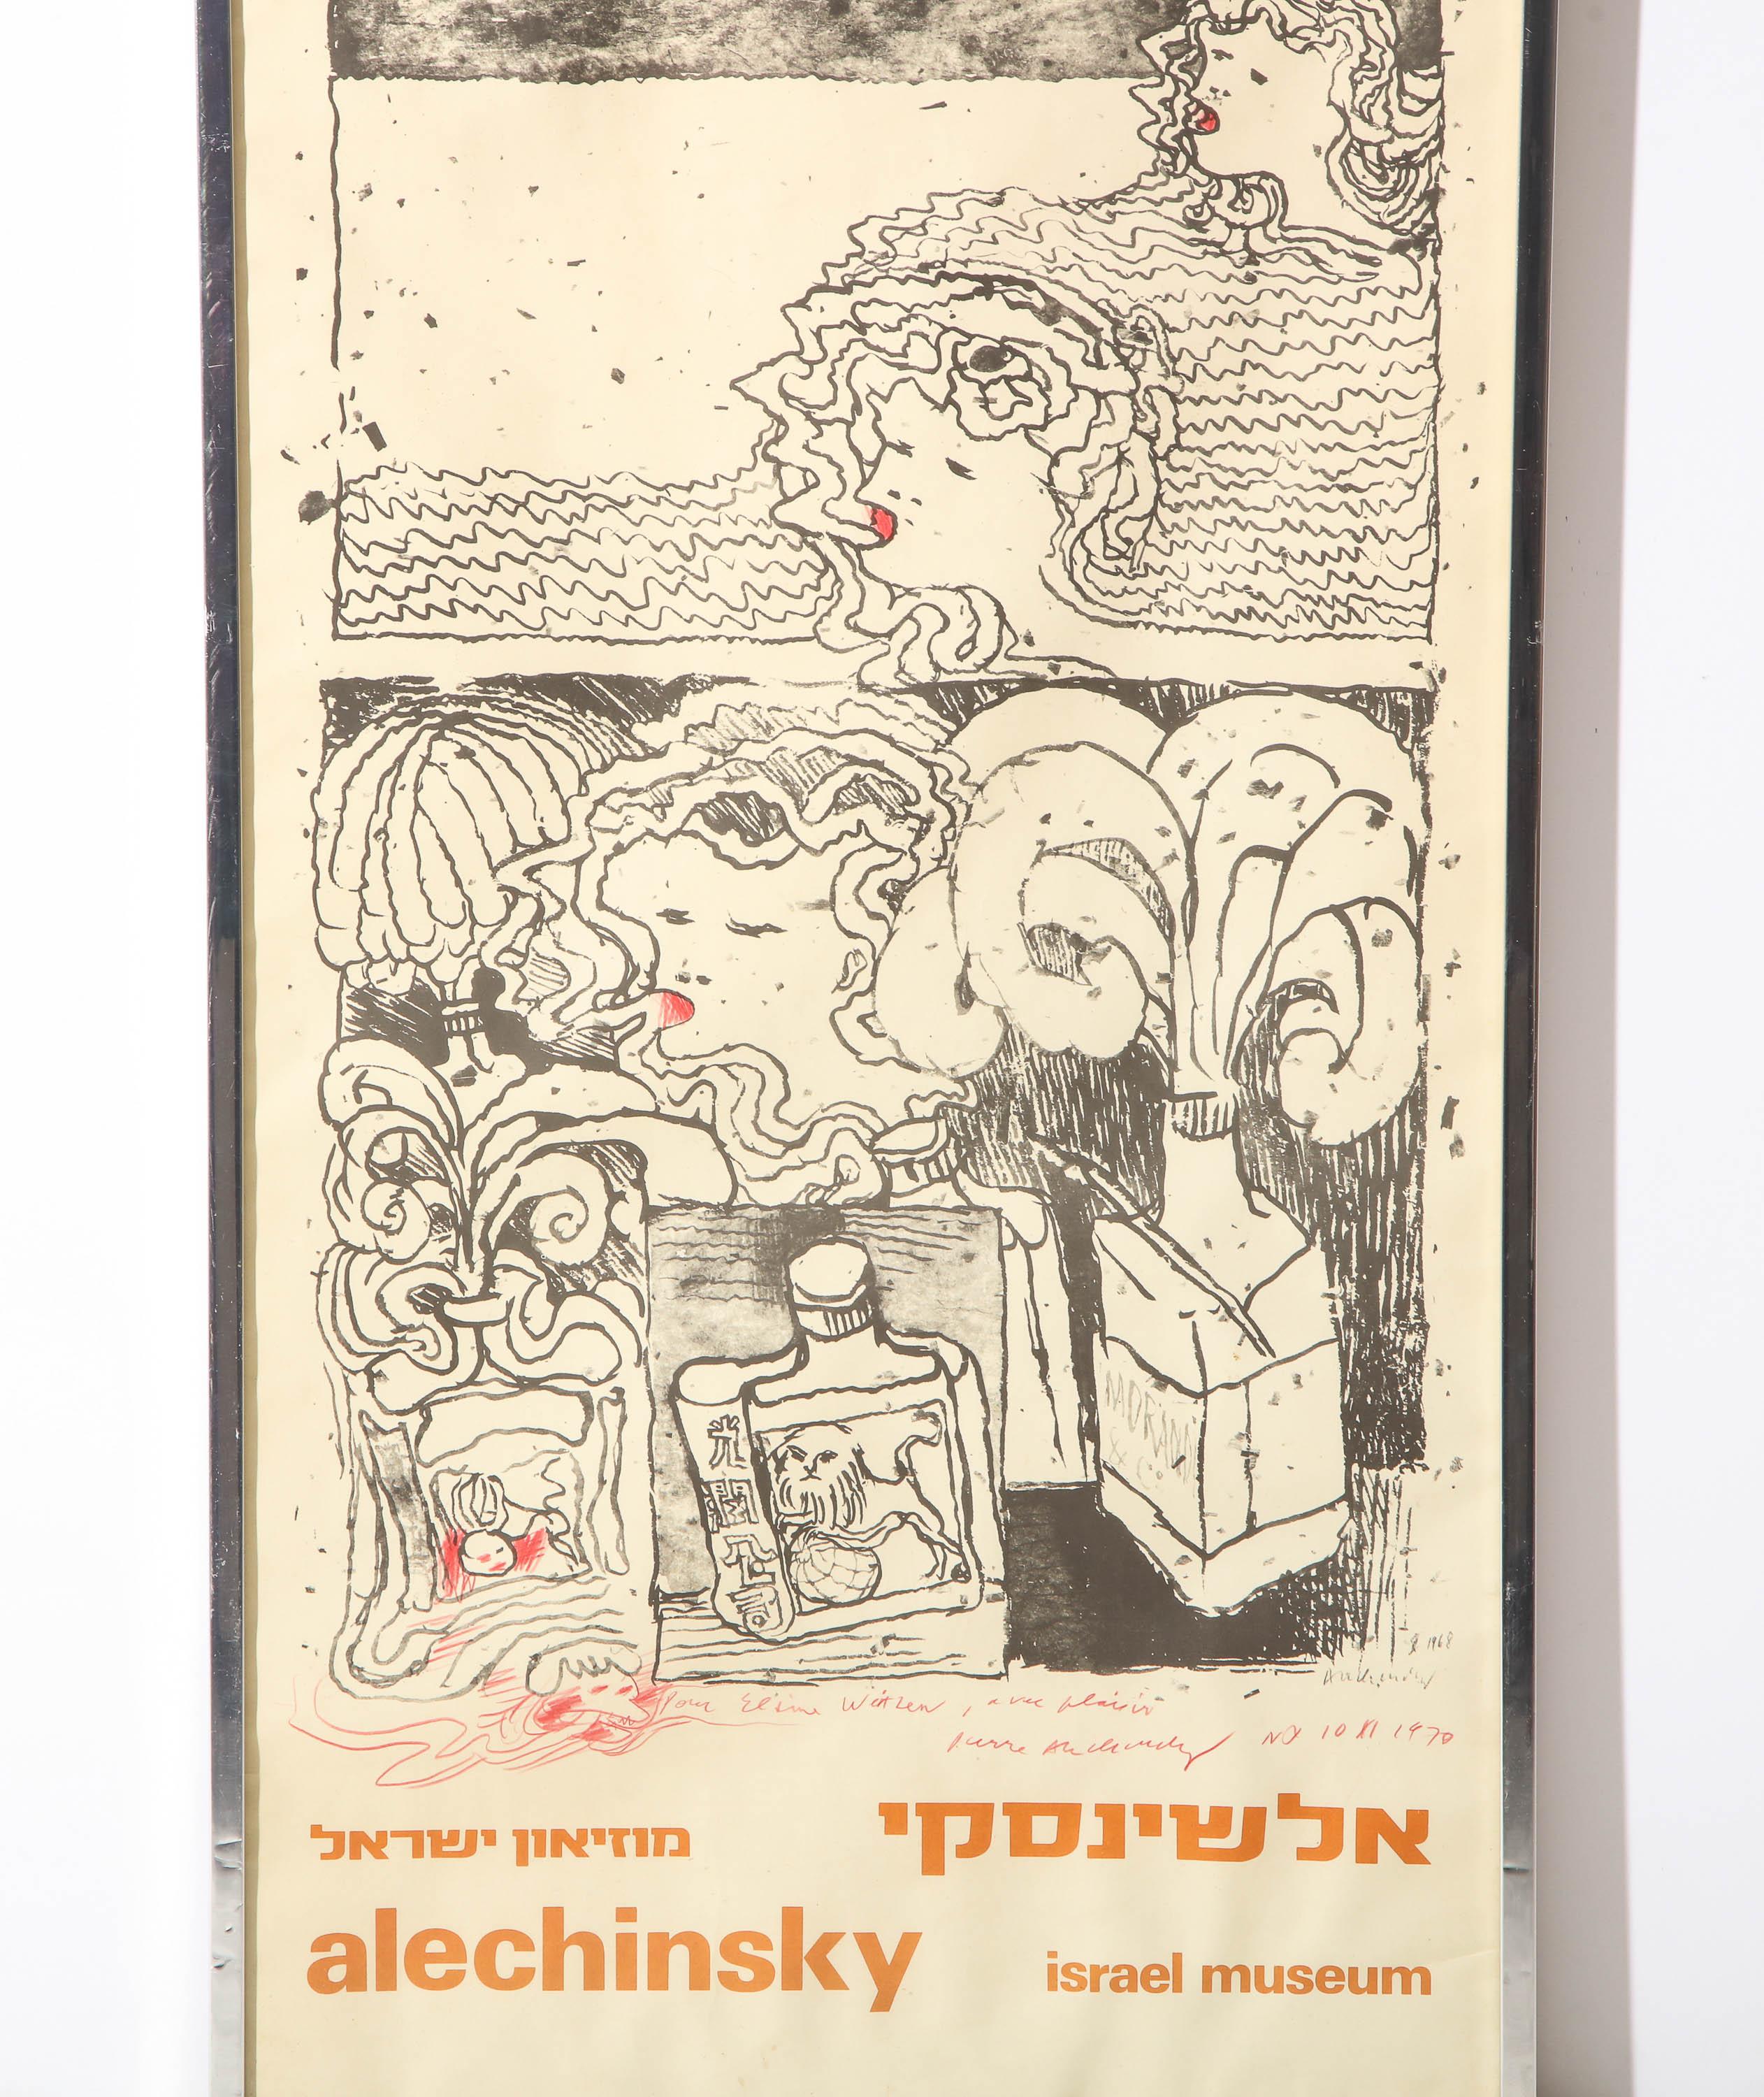 Poster from a 1970 Pierre Alechinsky solo exhibition at the Israel Museum, Jerusalem. With an inscription to Elaine Weitzen and an added drawing in red crayon by the artist. Weitzen was a private New York City art dealer and philanthropist. She was